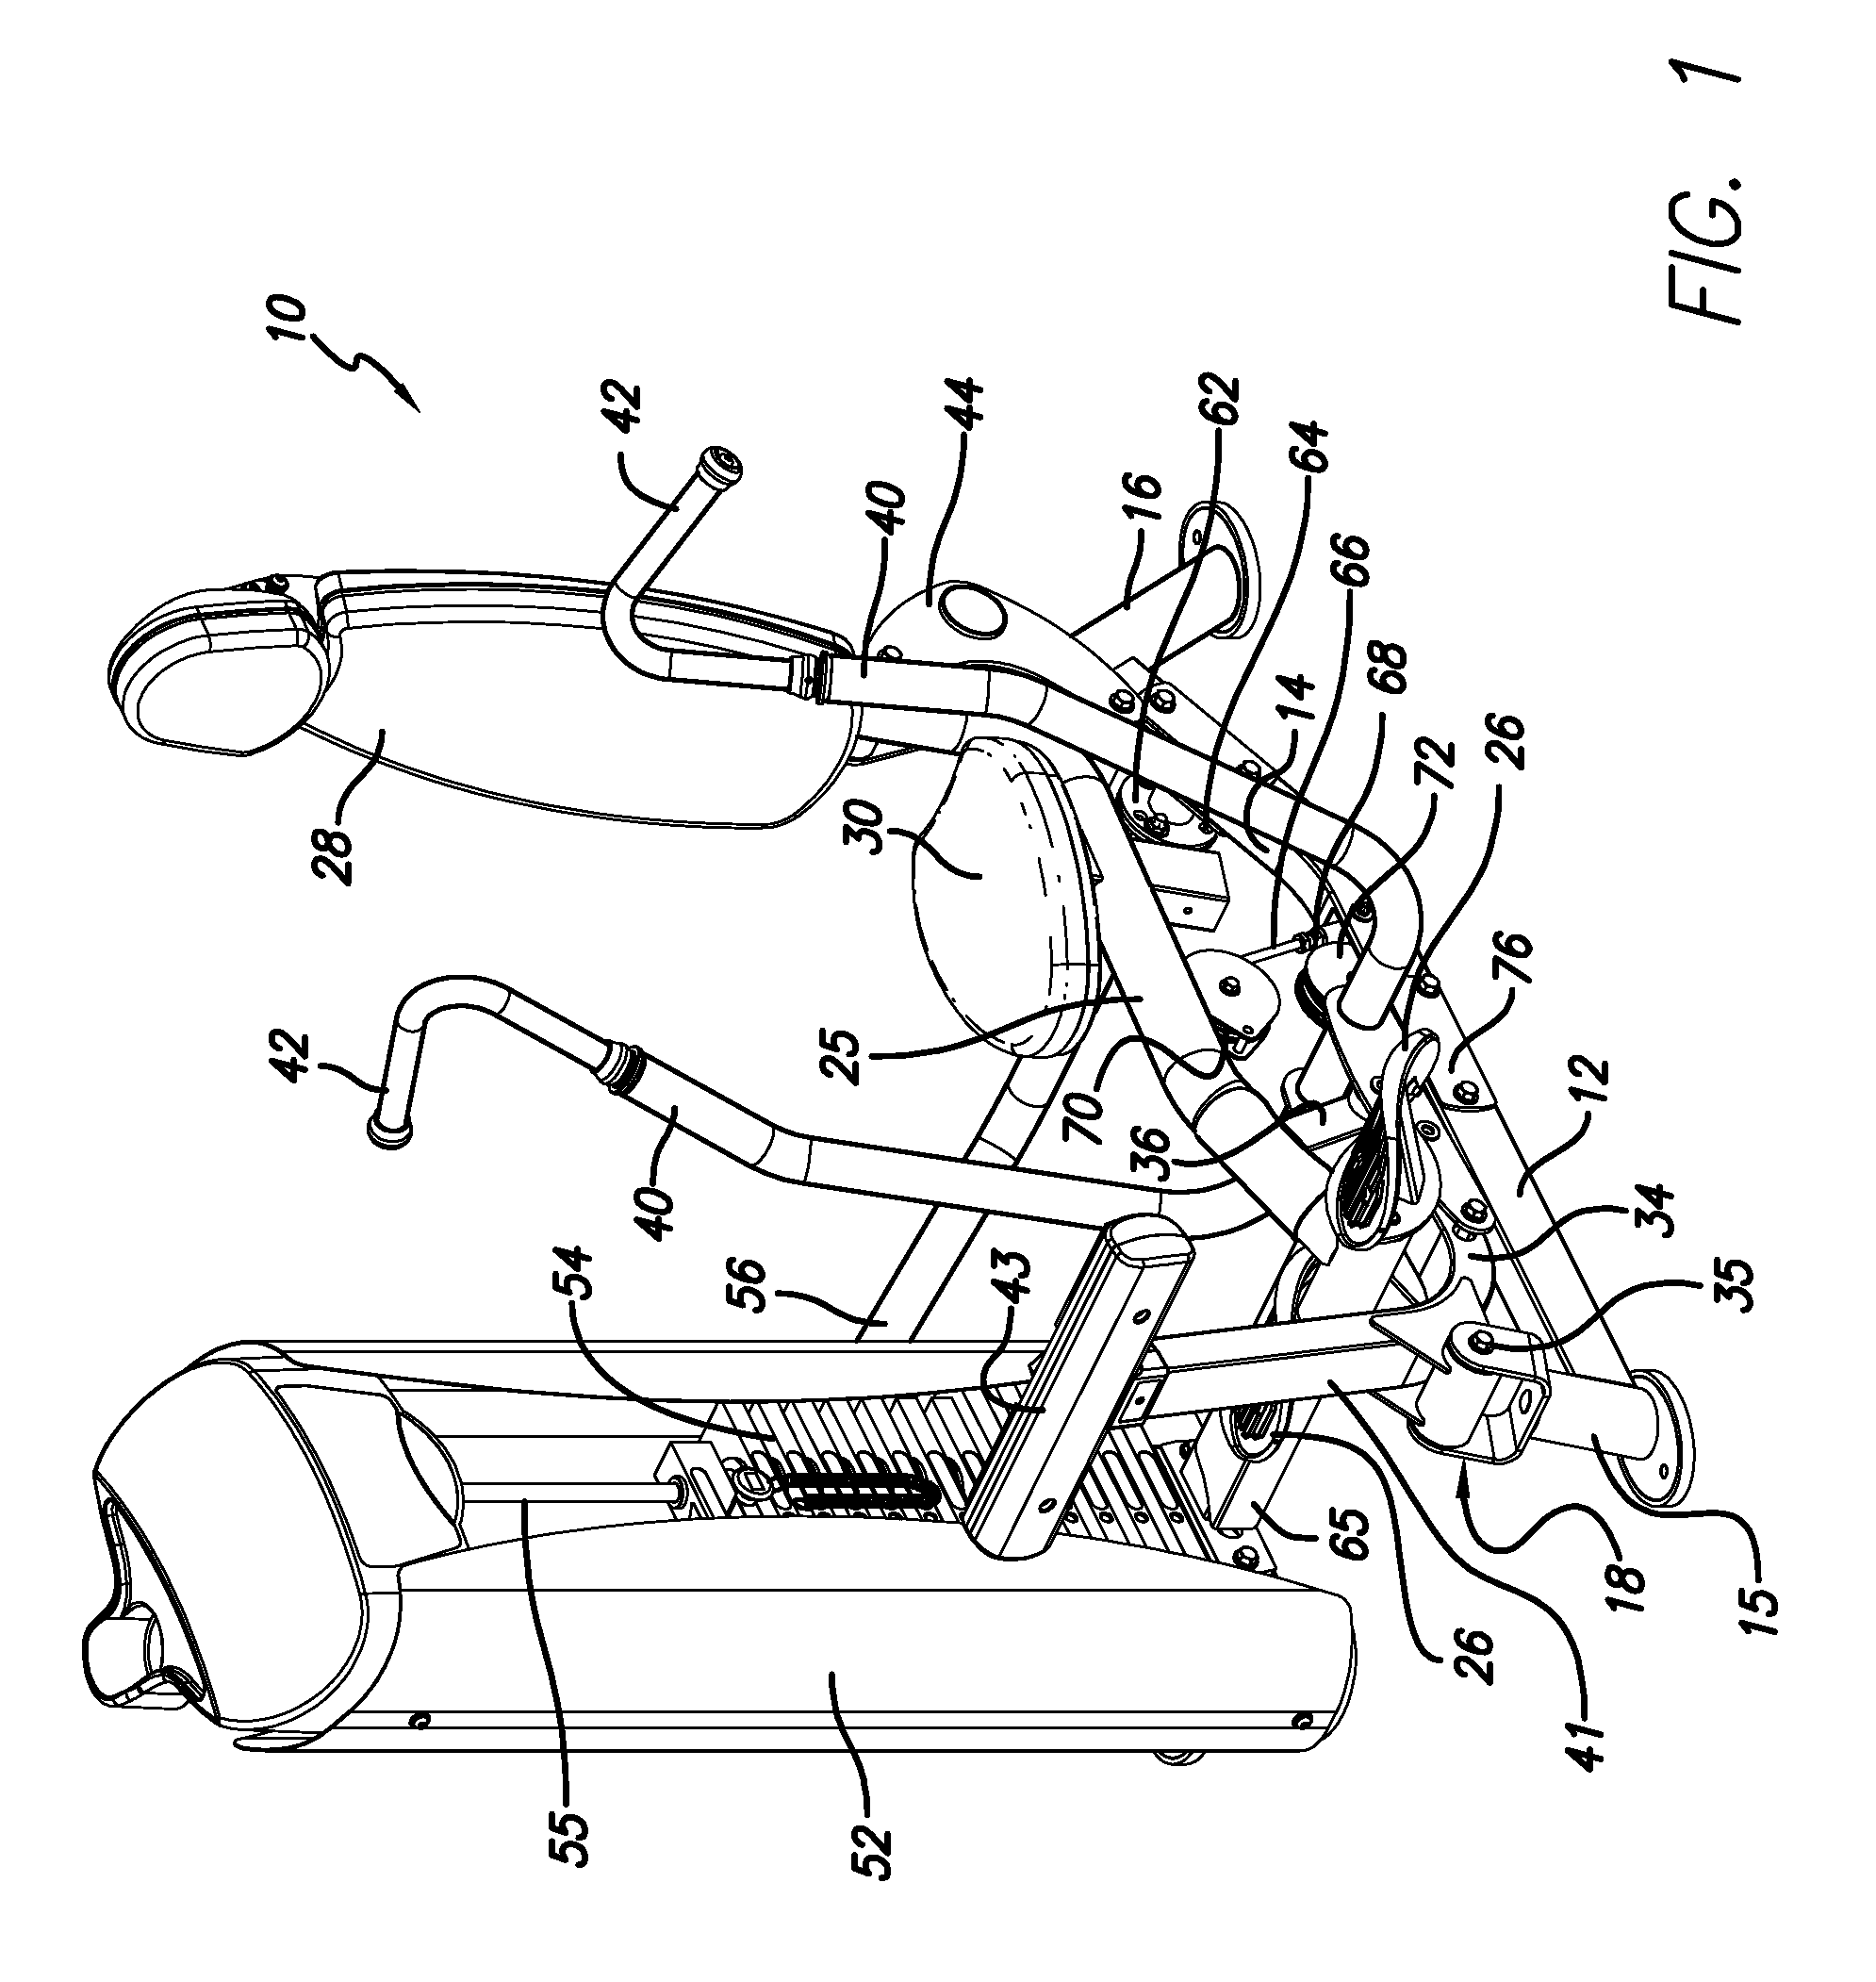 Chest press exercise machine with self-aligning pivoting user support